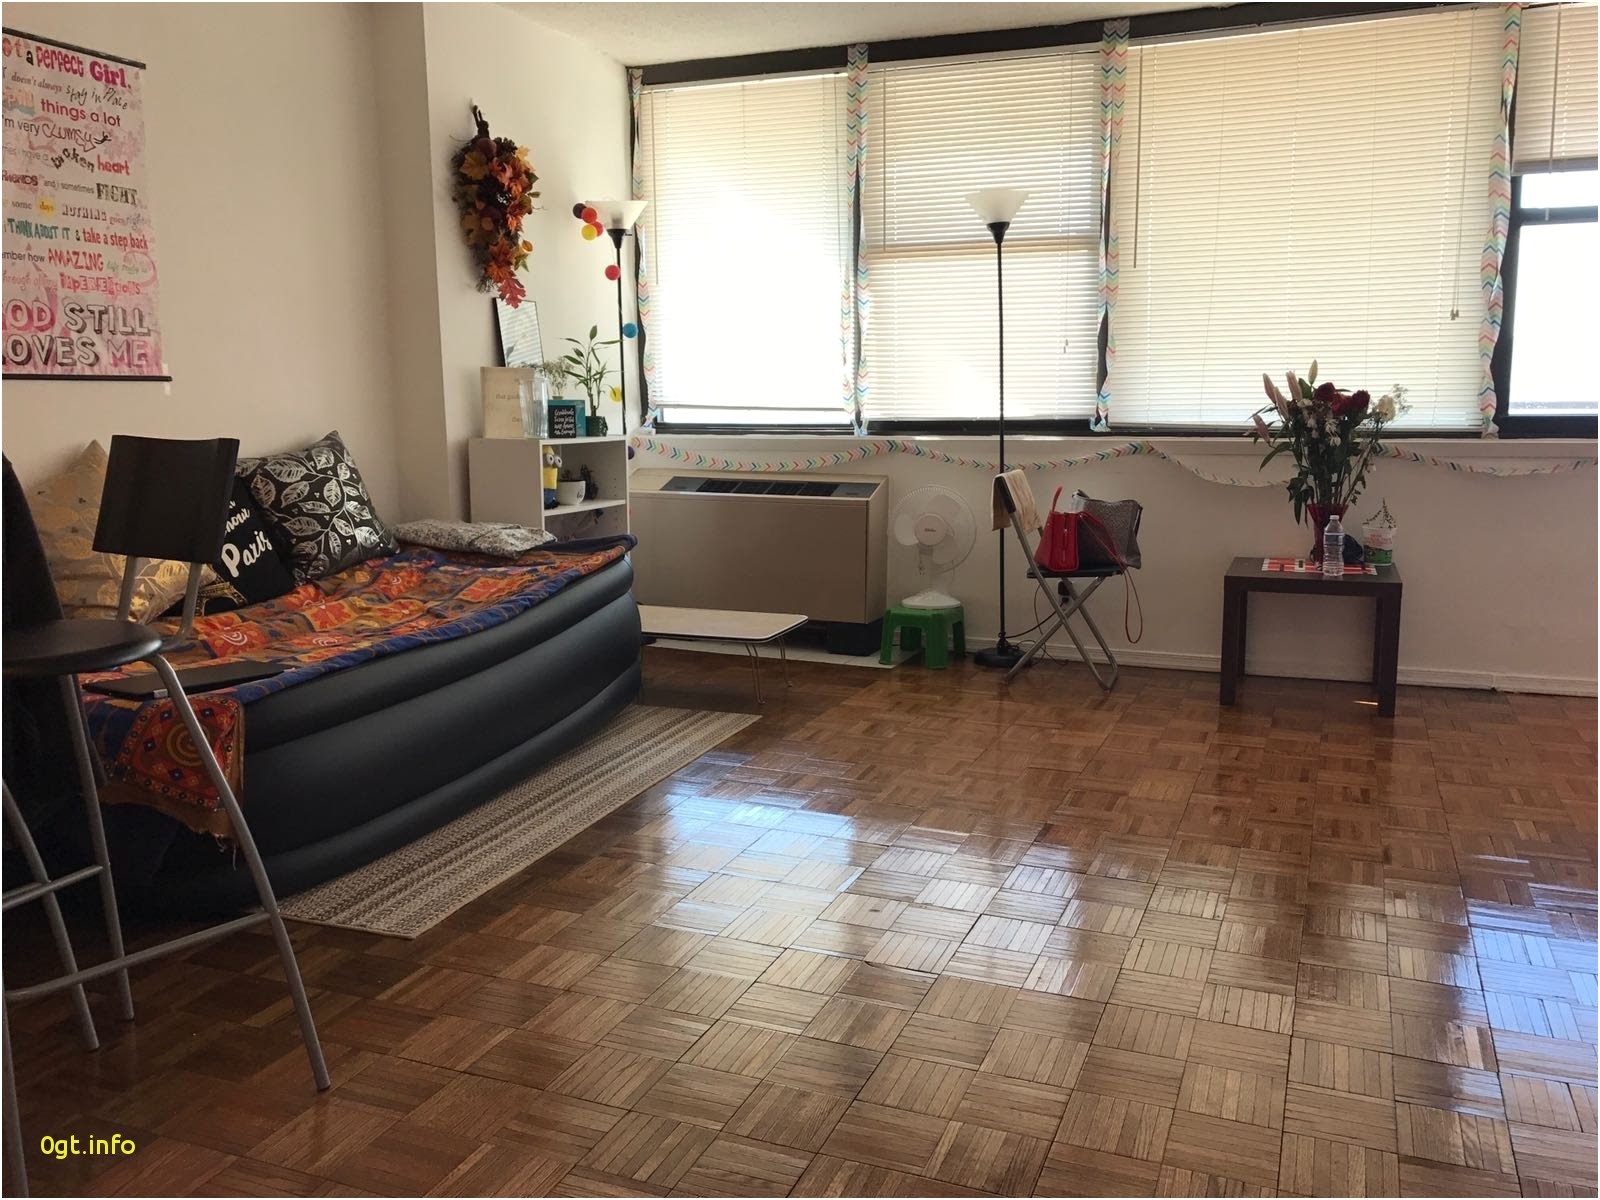 affordable 1 bedroom apartments for rent awesome 1 bedroom apartment to rent in ozone park ny single bedroom